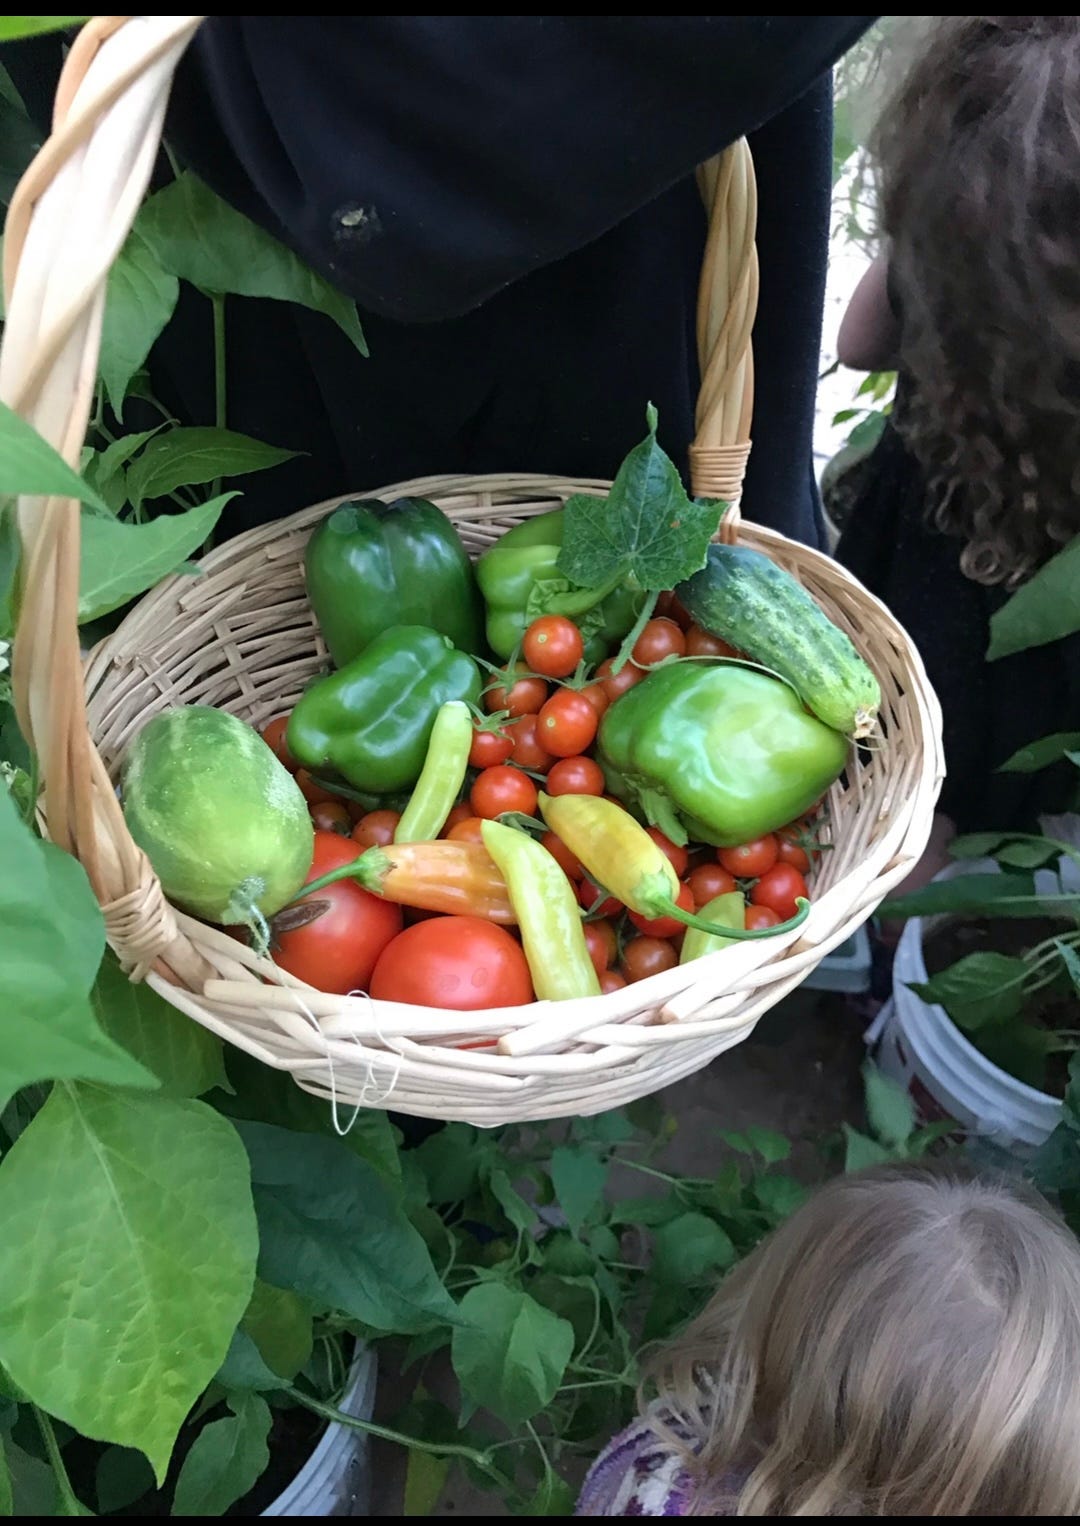 A wicker basket full of homegrown vegtables, surounded by greenery.